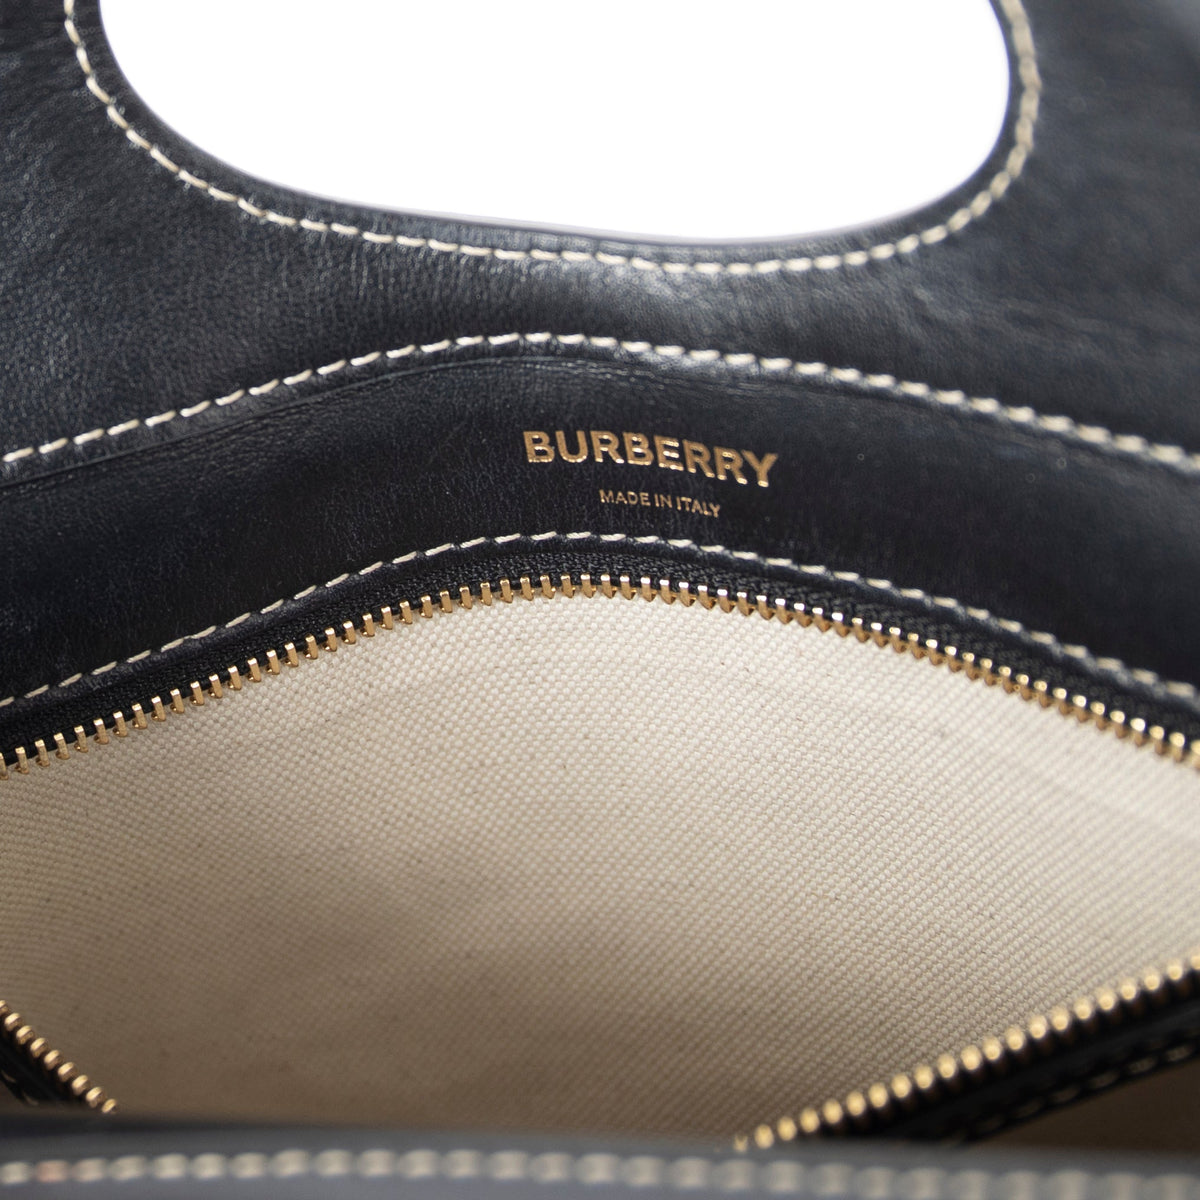 Burberry - Branded bags at affordable prices!